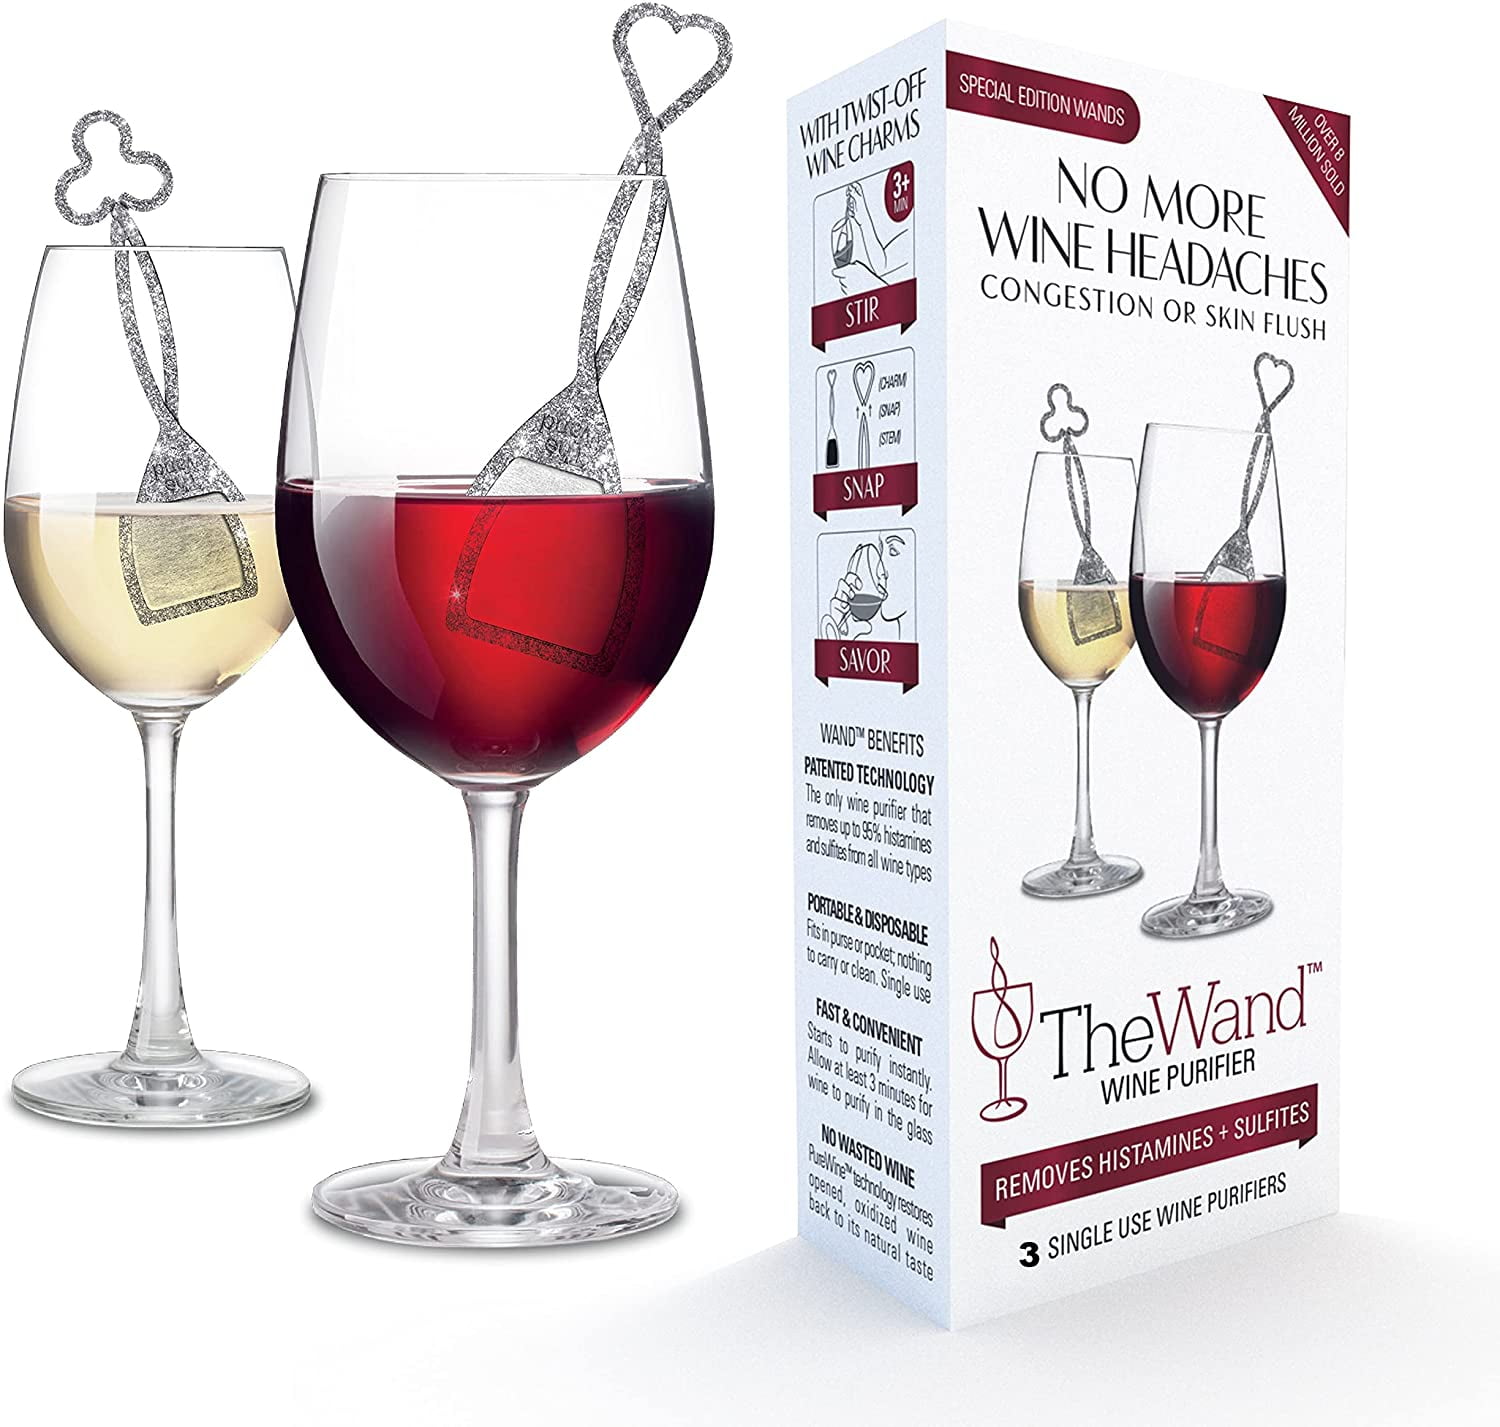 The Original Drop It Wine Drops, 2pk- USA Made Wine Drops That Naturally  Reduce